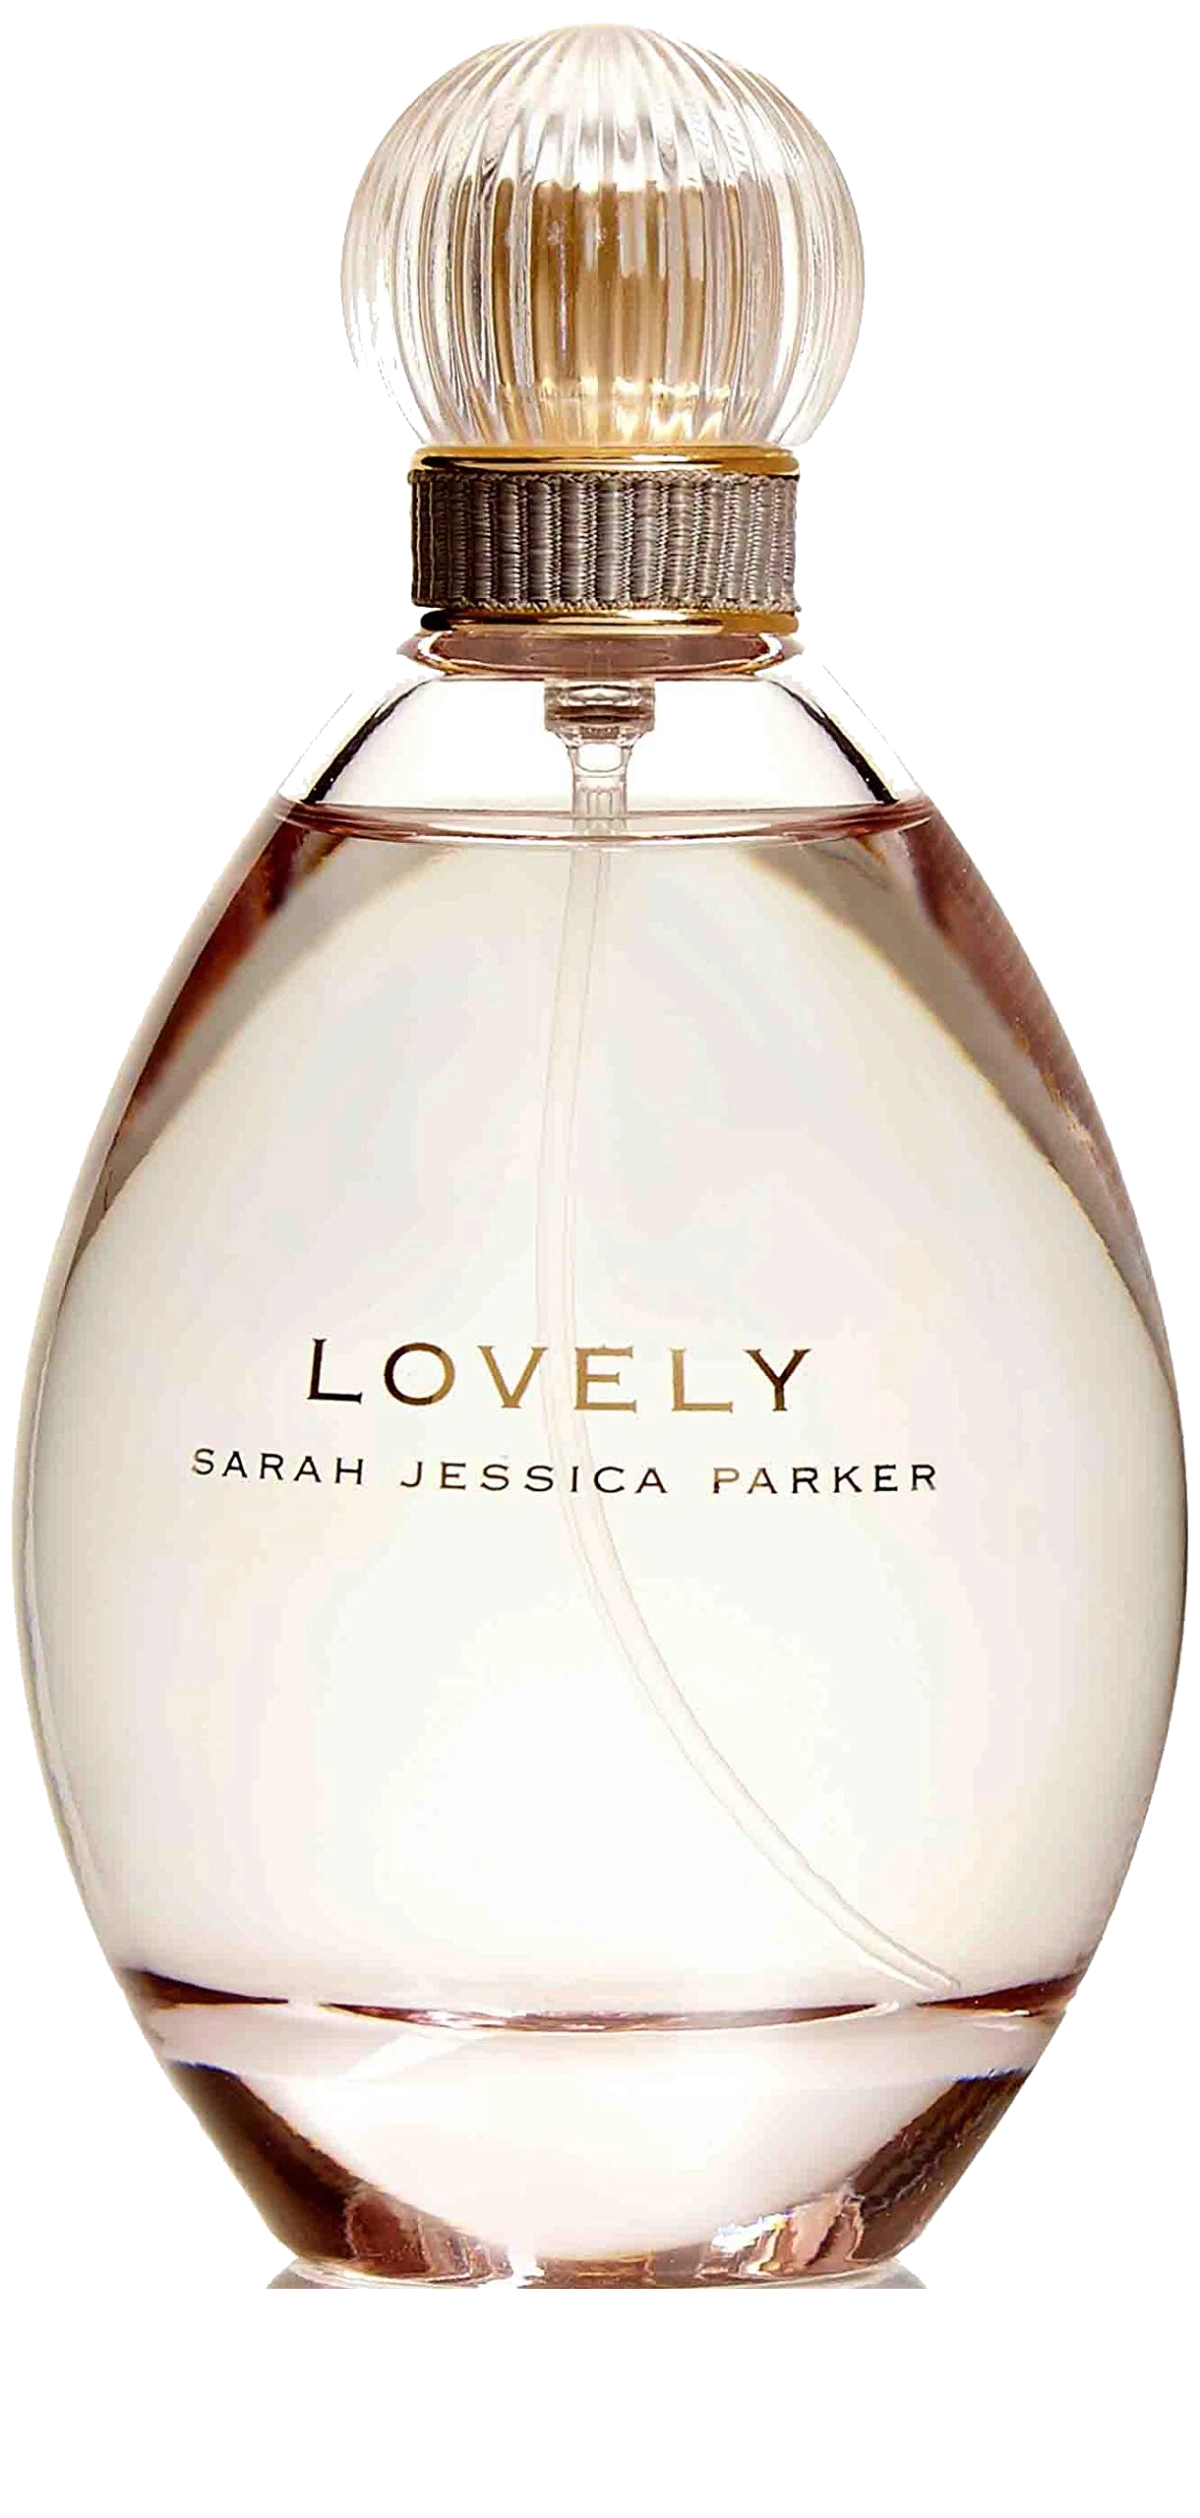 Close-up of a Sarah Jessica Parker Lovely perfume bottle on a chic vanity table, accented by soft lighting and floral decor.